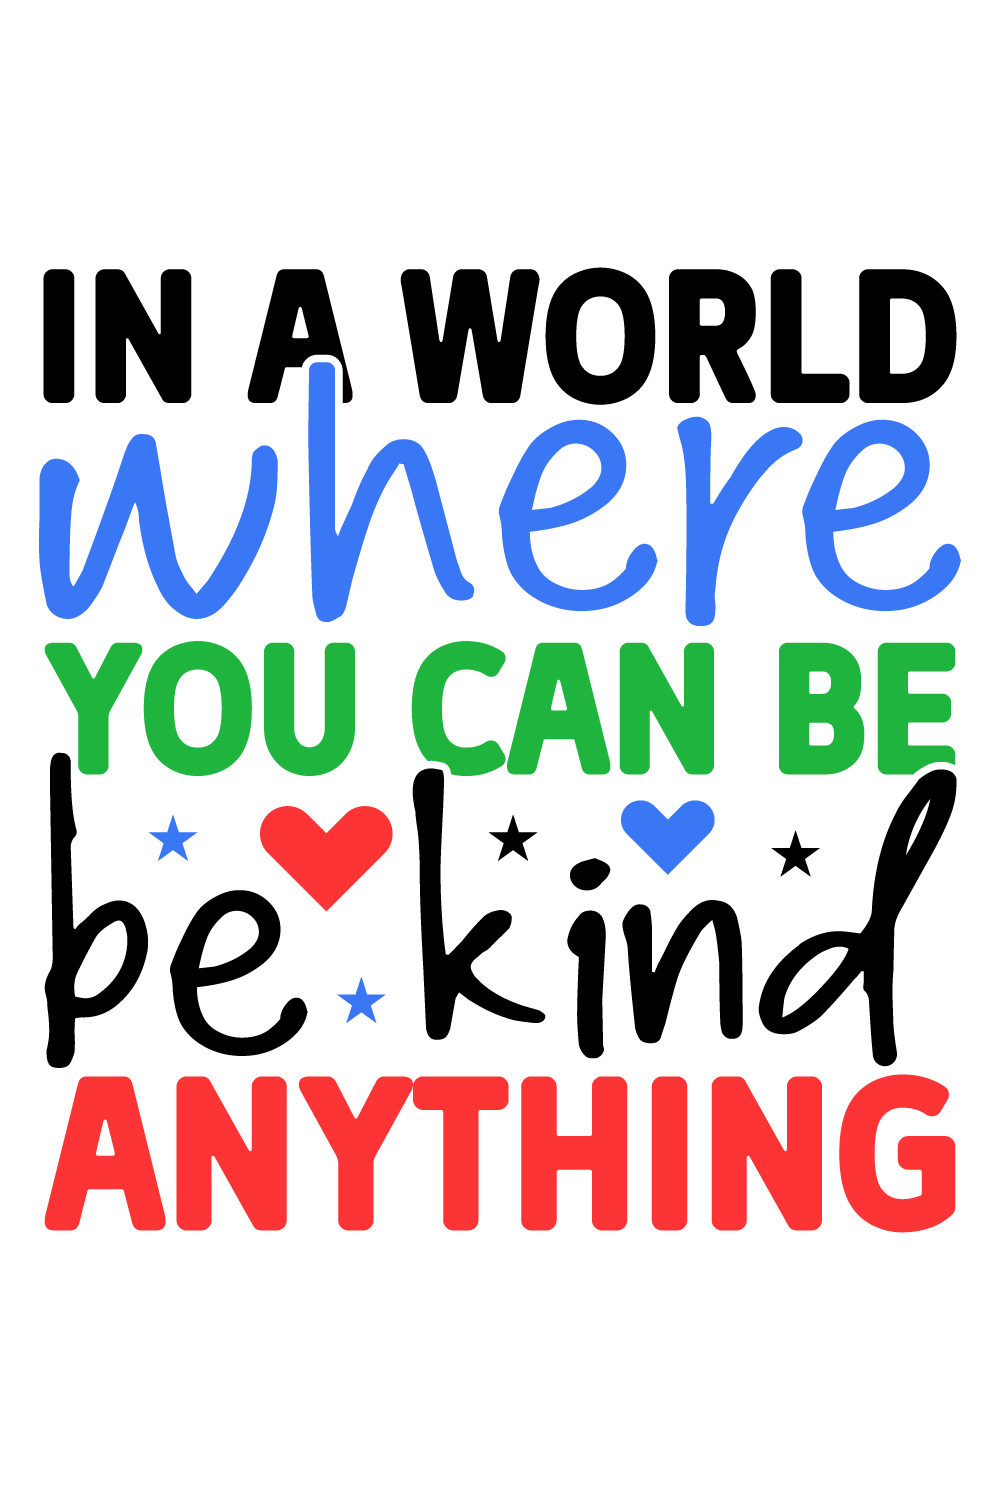 in a world where you can be anything be kind pinterest preview image.